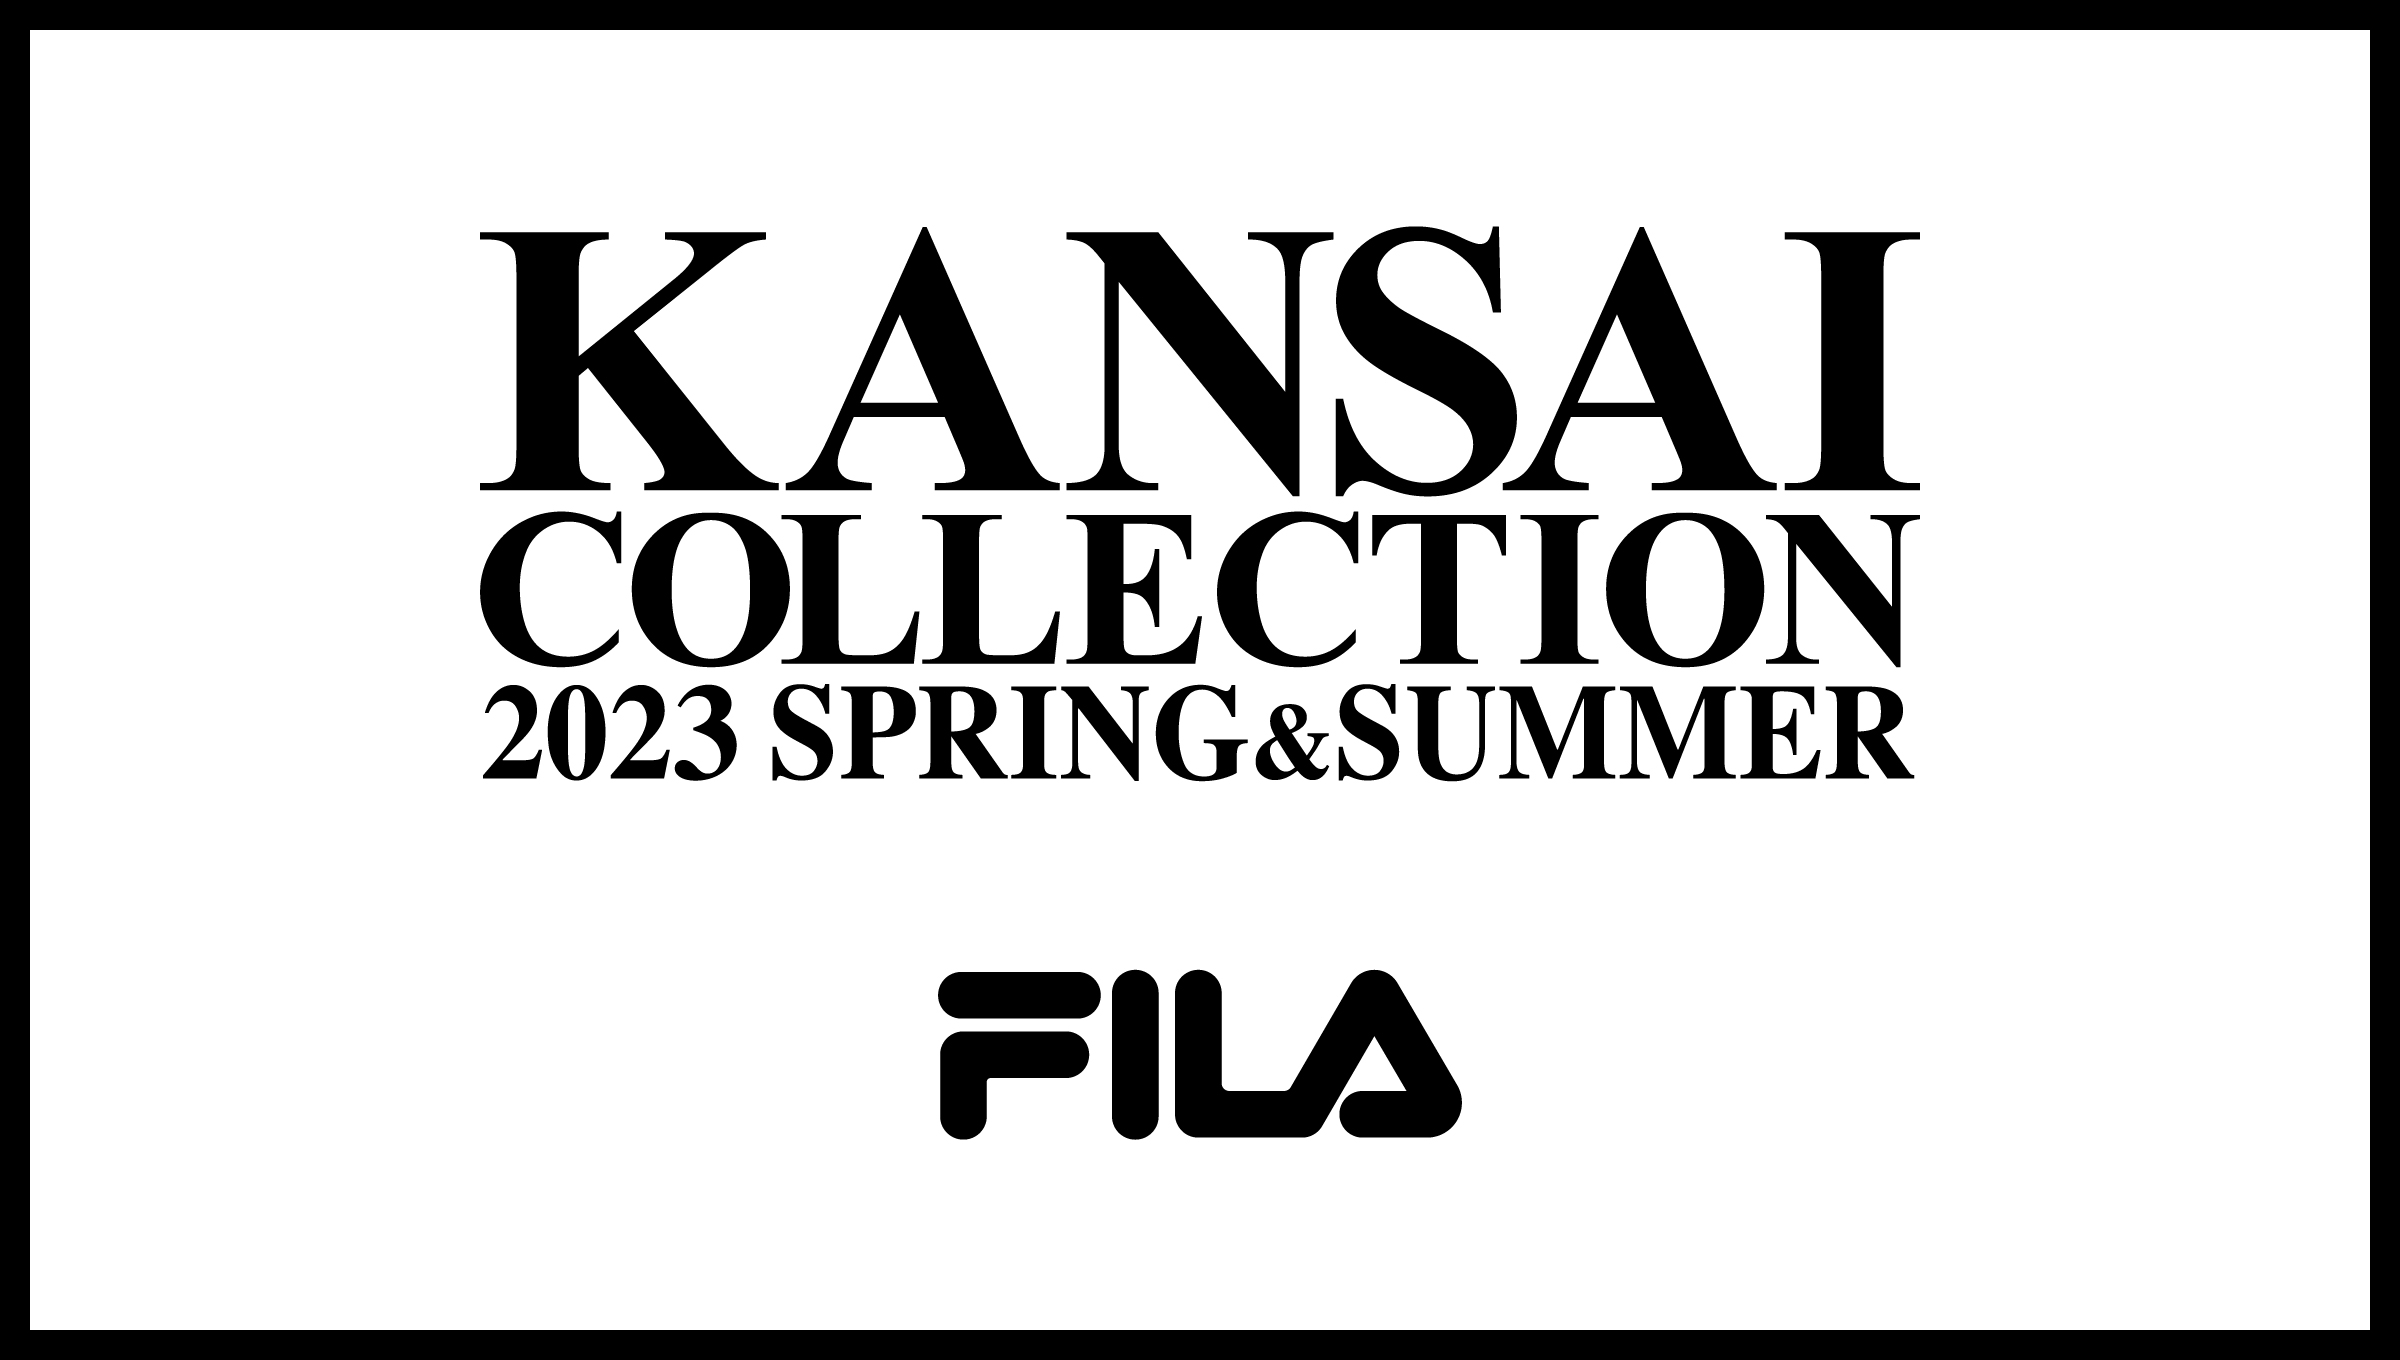 KANSAI COLLECTION 23SS 着用アイテムのご紹介！